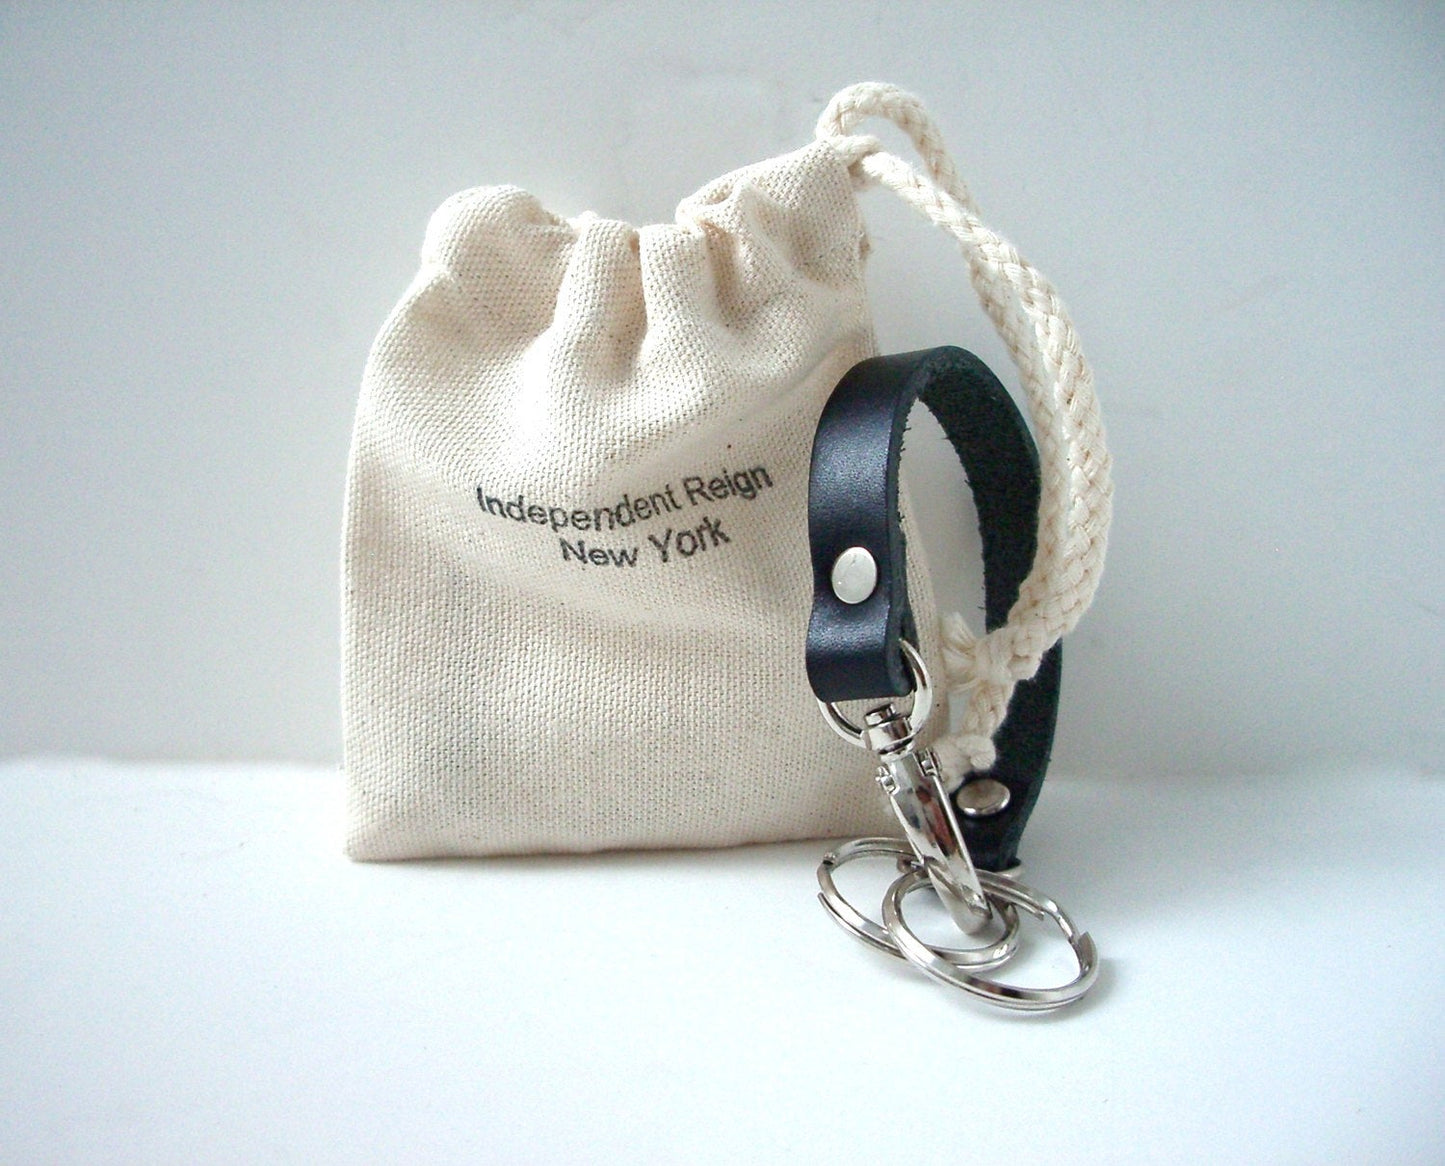 Valet Style Keychains, Leather Key Chains for Men or Women